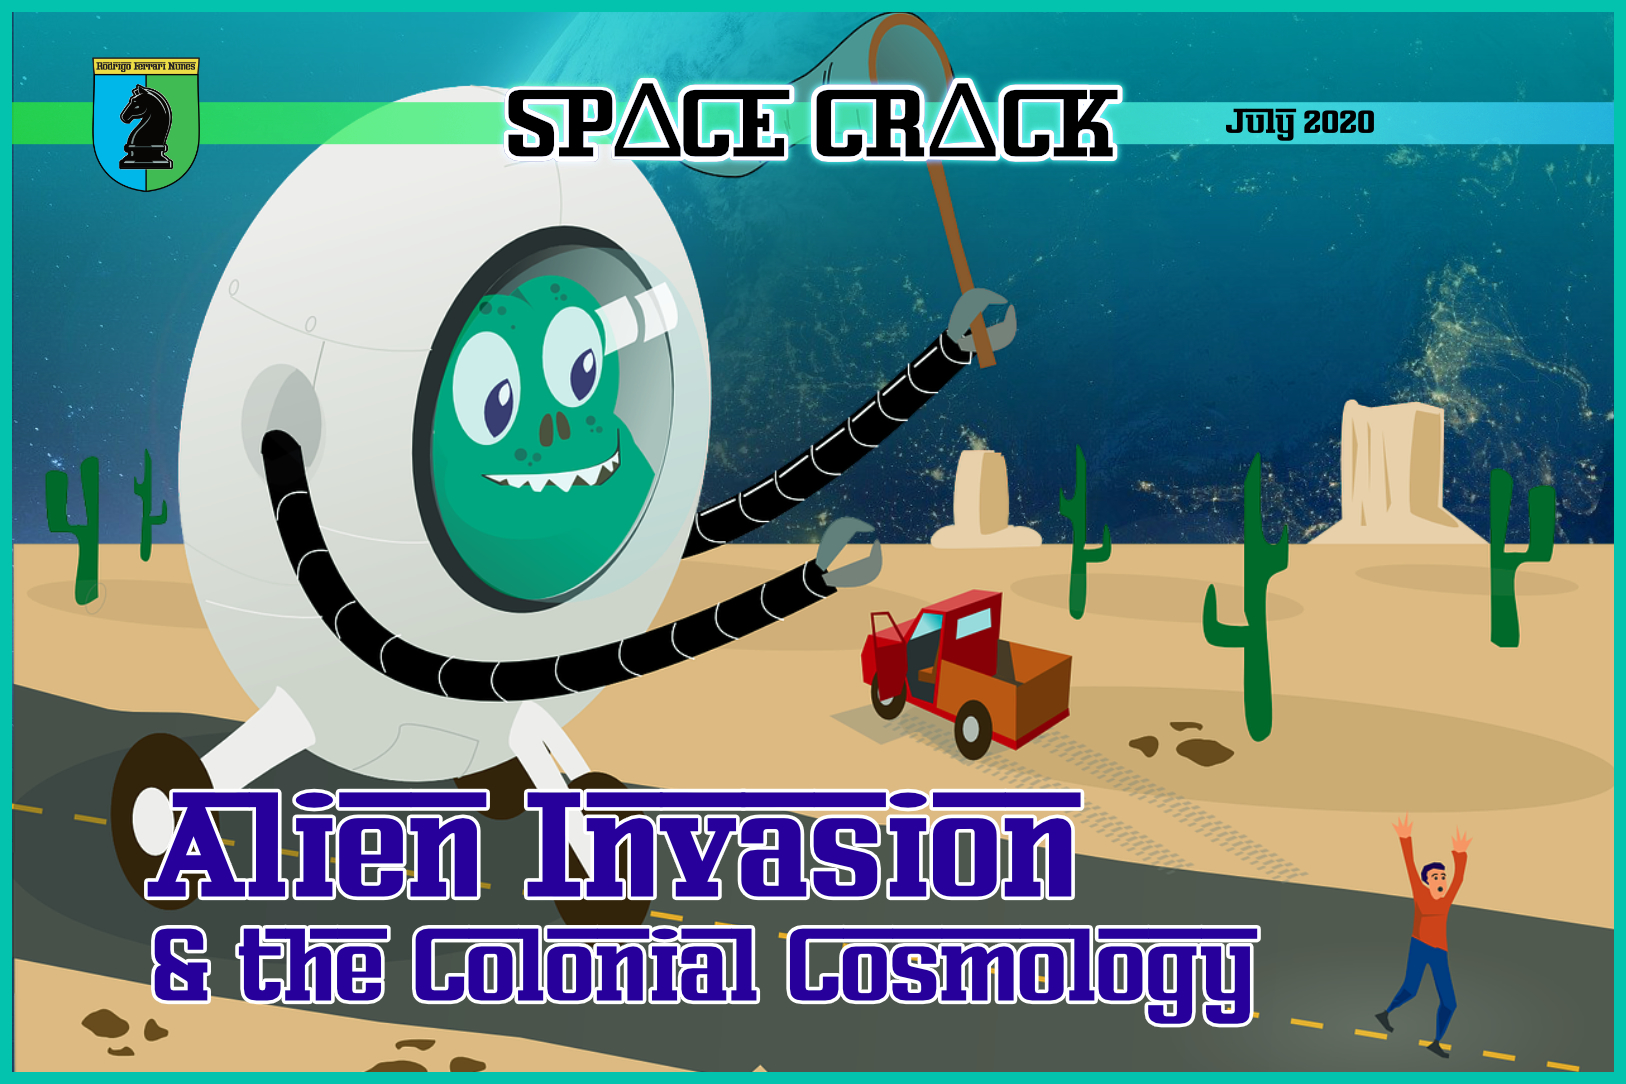 ALIEN INVASION AND THE COLONIAL COSMOLOGY